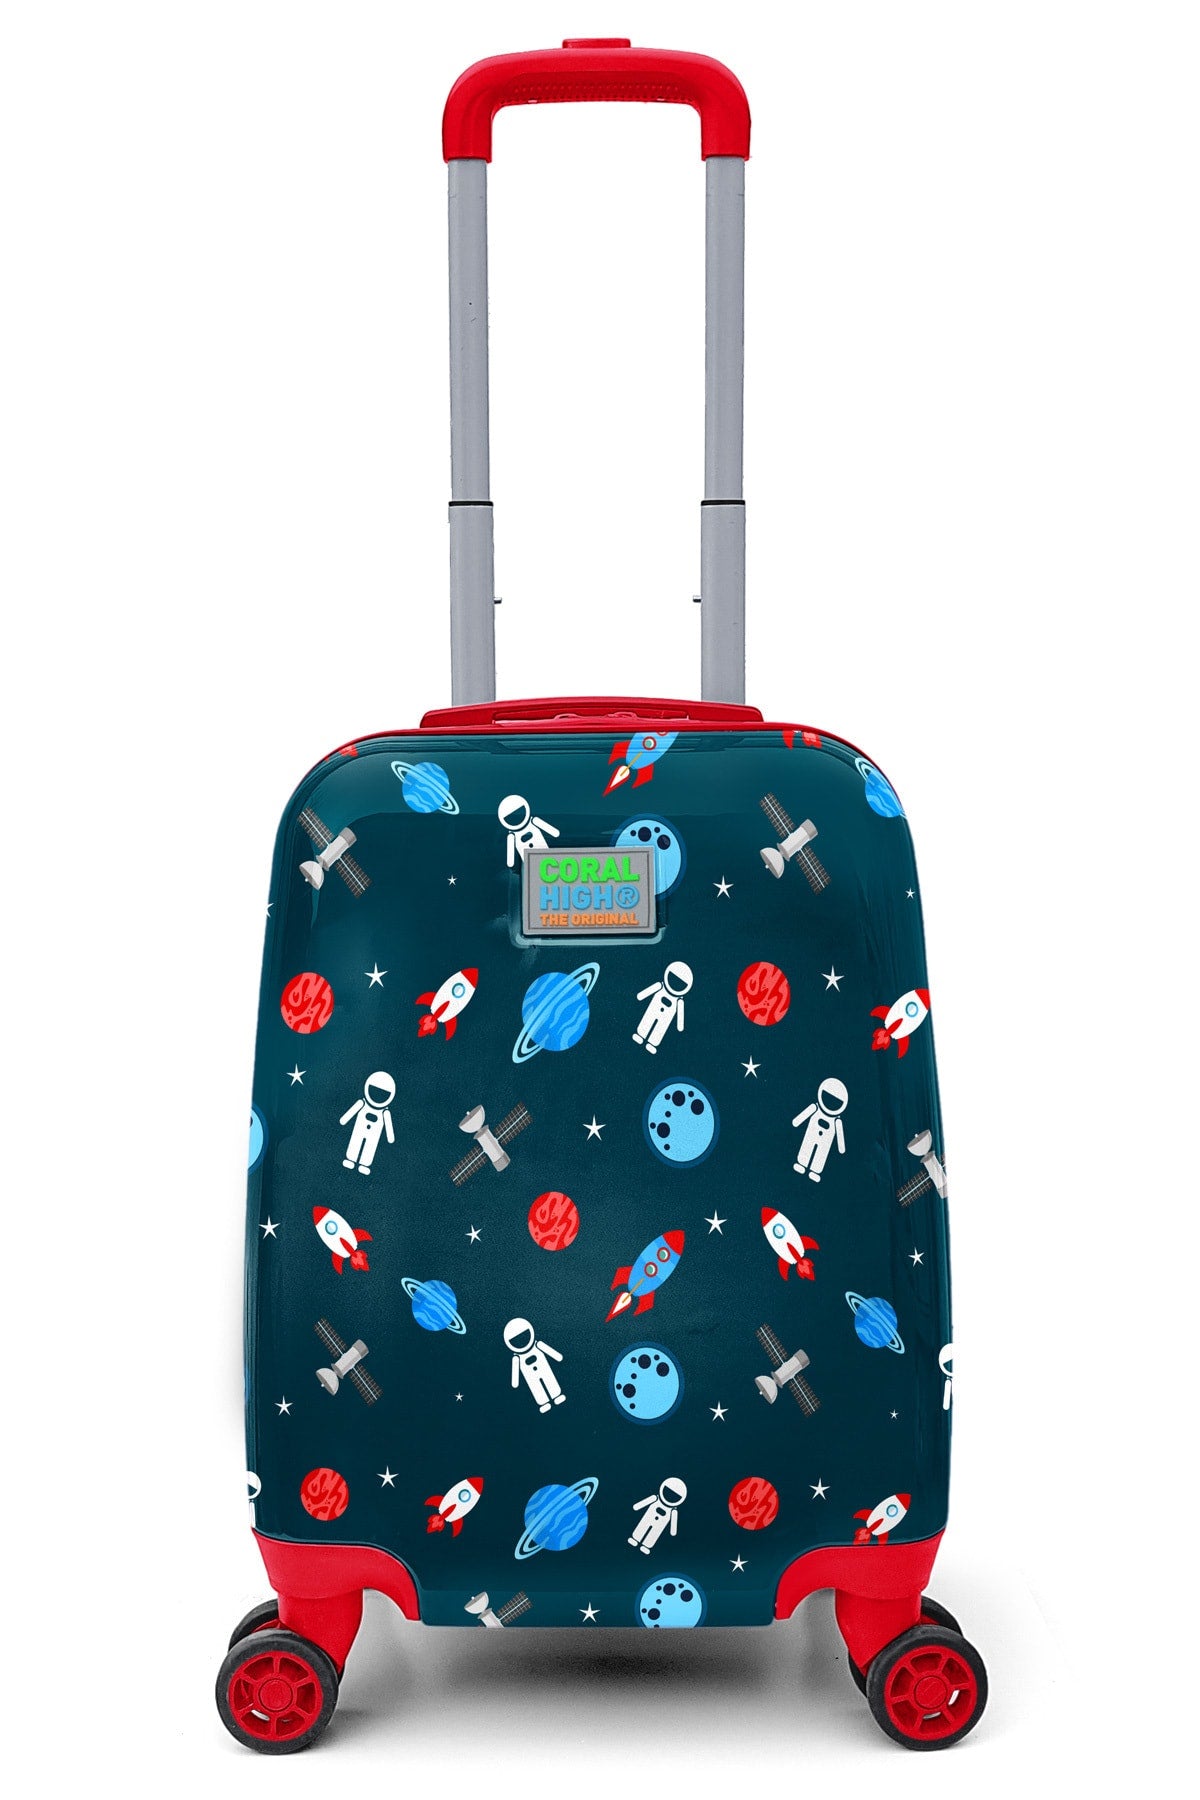 Kids Indigo Red Space Patterned Suitcase 16749